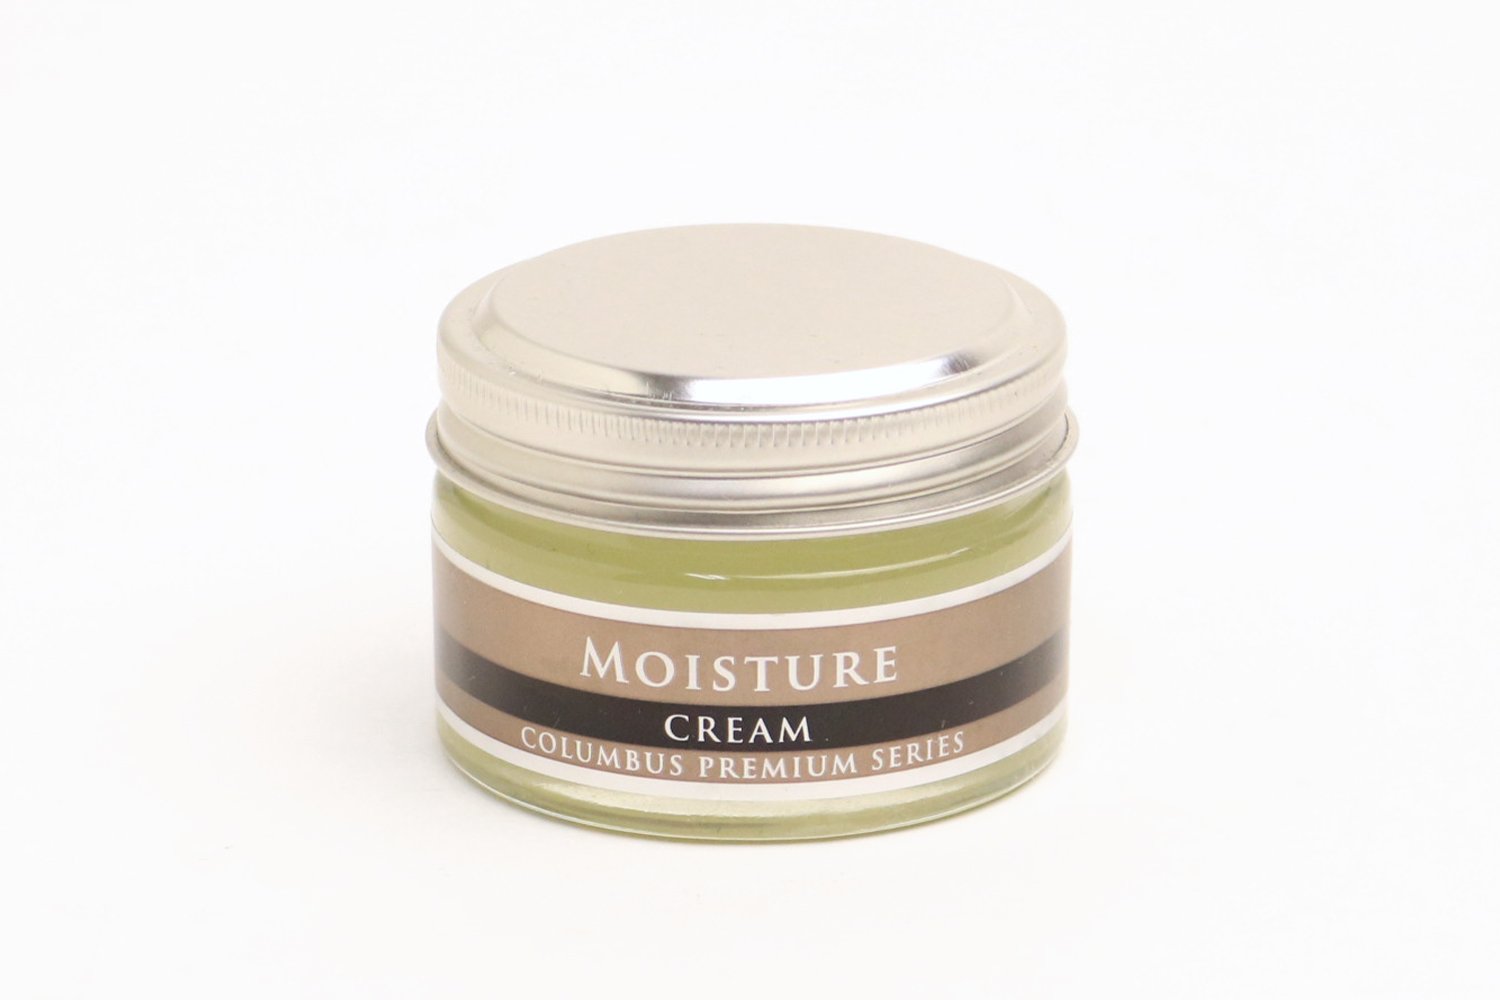 COLUMBUS Leather moisturizing cream from a manufacturer specializing in leather care products